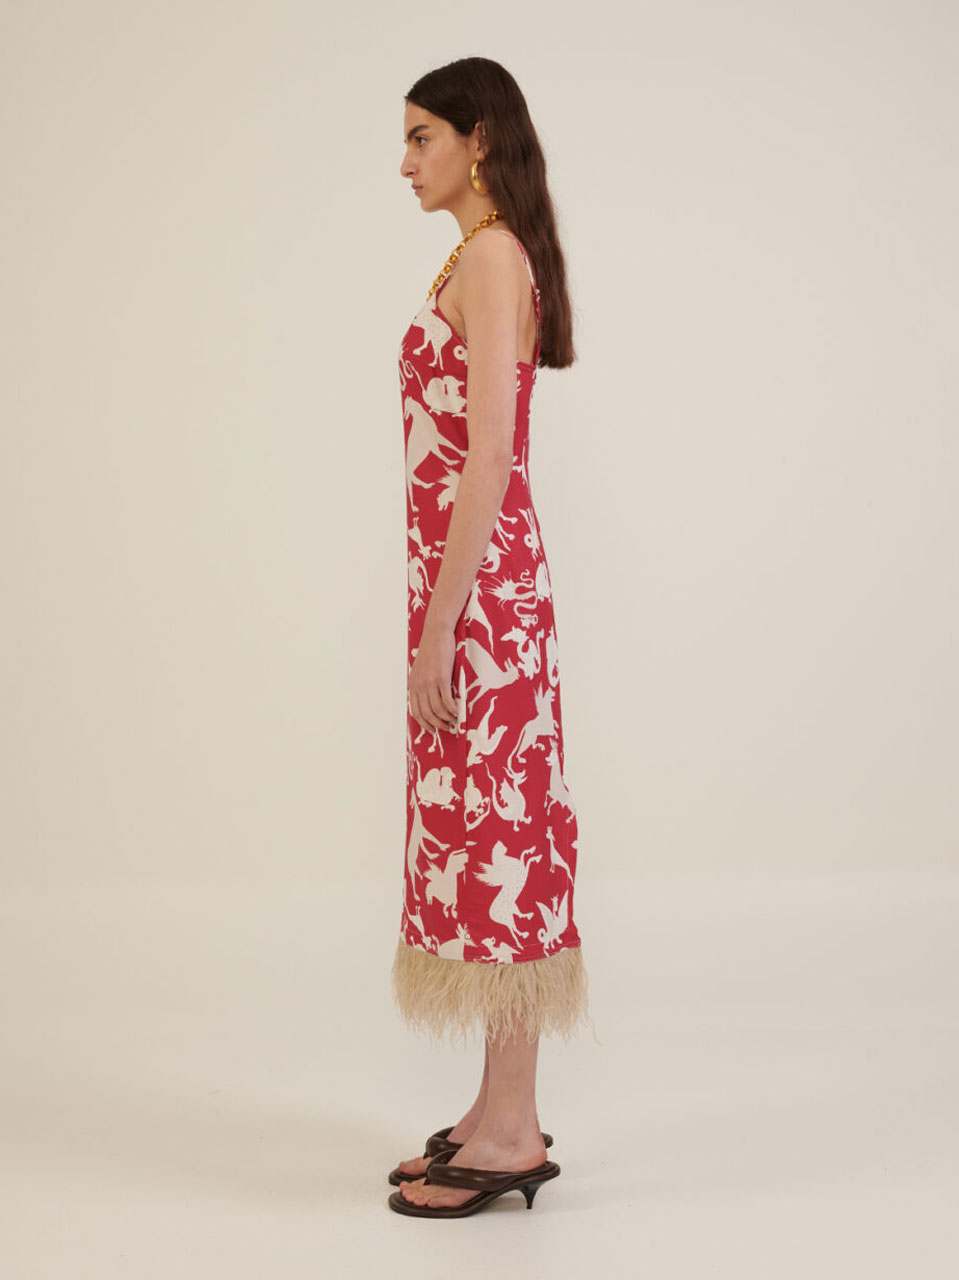 Milkwhite-Printed-Slip-Dress-With-Feathers-2